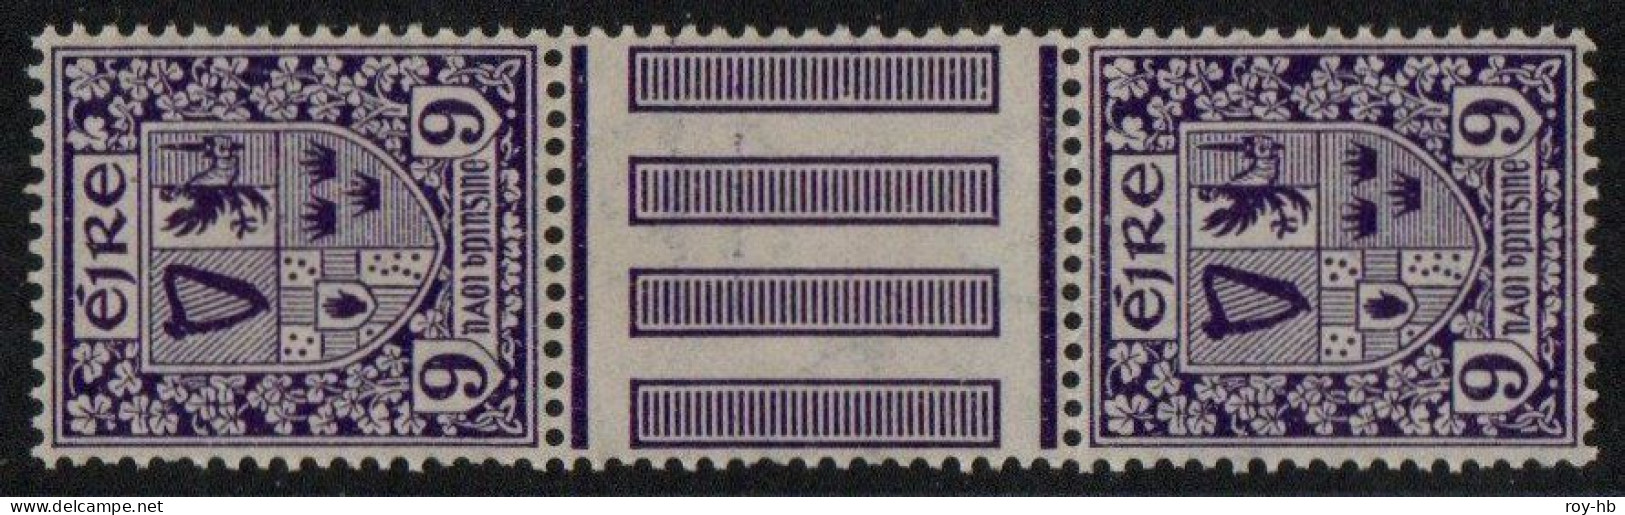 1923 Wmk. "Se" 9d Gutter Pair, Lightly Folded, Fresh Never-hinged Mint, With New BPP Cert.  Mi. 49A, SG 80, Hib. D10 Gp. - Unused Stamps